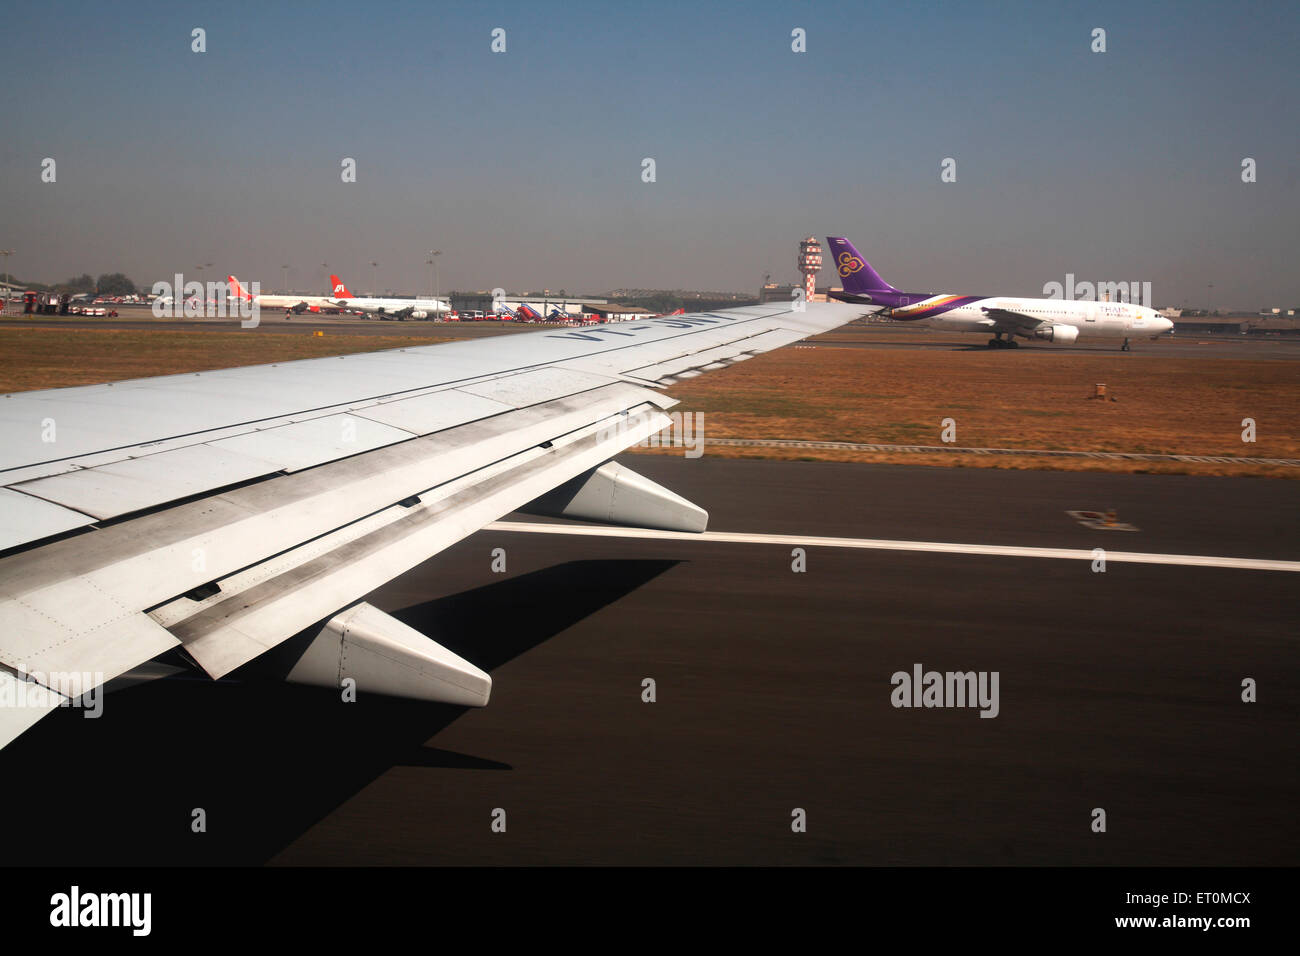 Wing of aircraft whiles aircraft taking off ; India Stock Photo